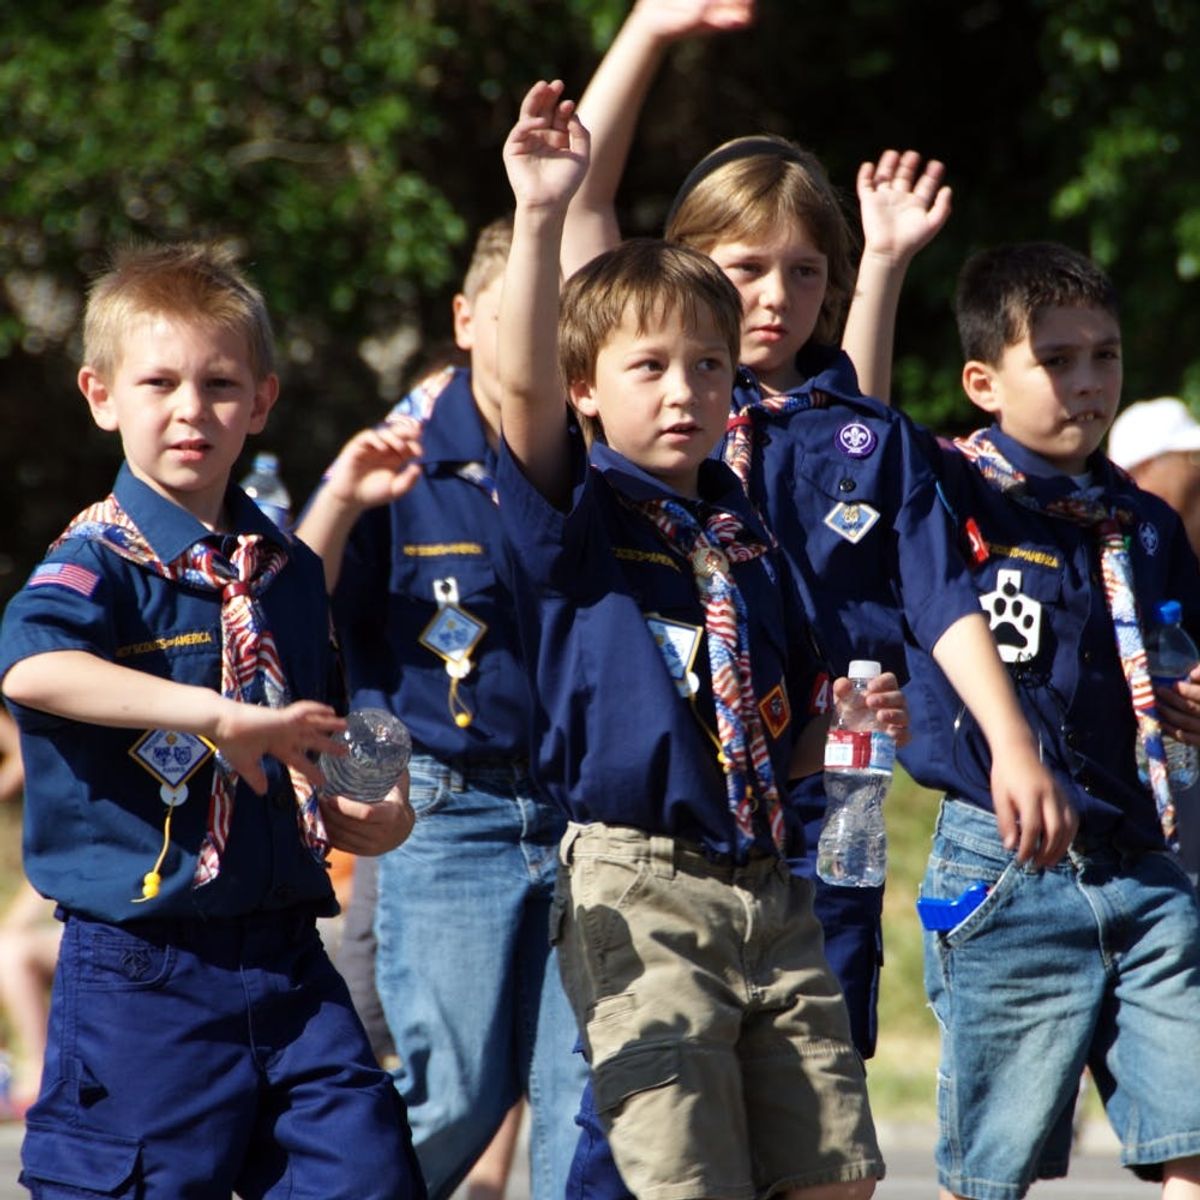 The Boy Scouts Will Now Allow Transgender Boys to Join